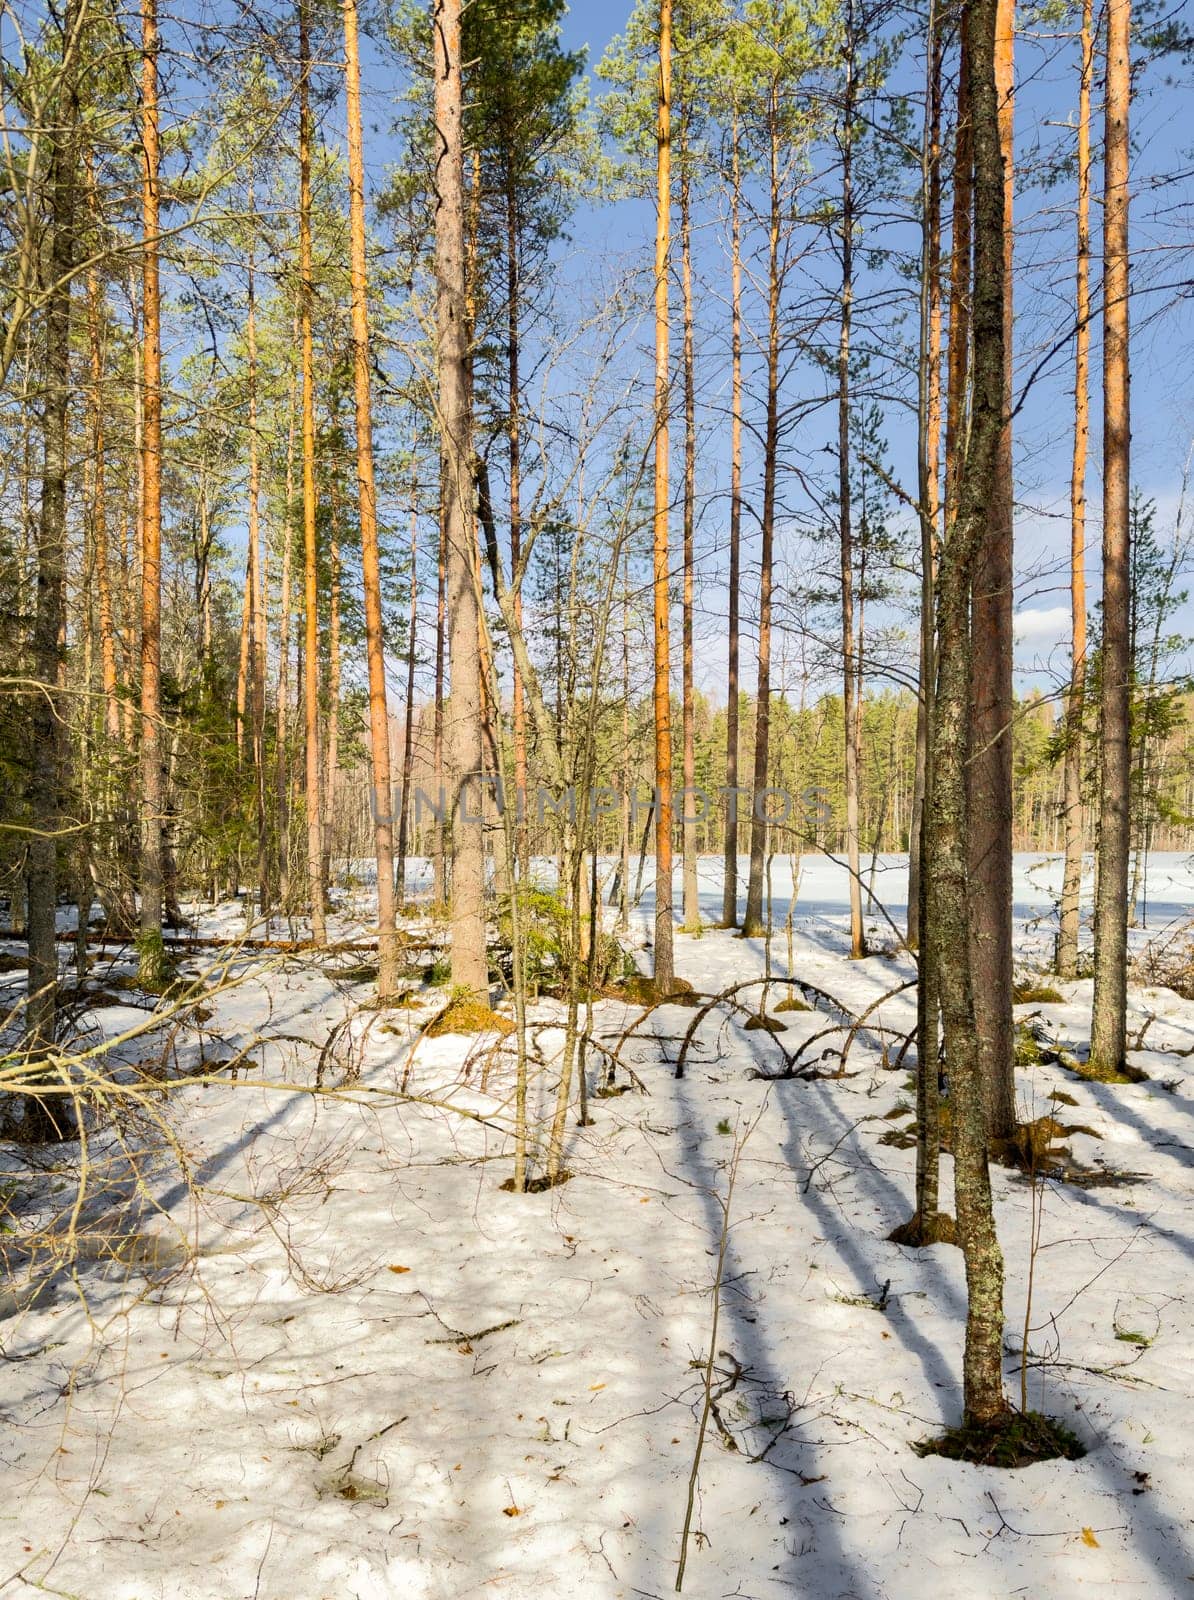 The wild forest wakes up, the sun rays through the trees, the snow melts, streams flow, green fir-trees at clear sunny day, snow has almost thawed, slow movement. High quality photo